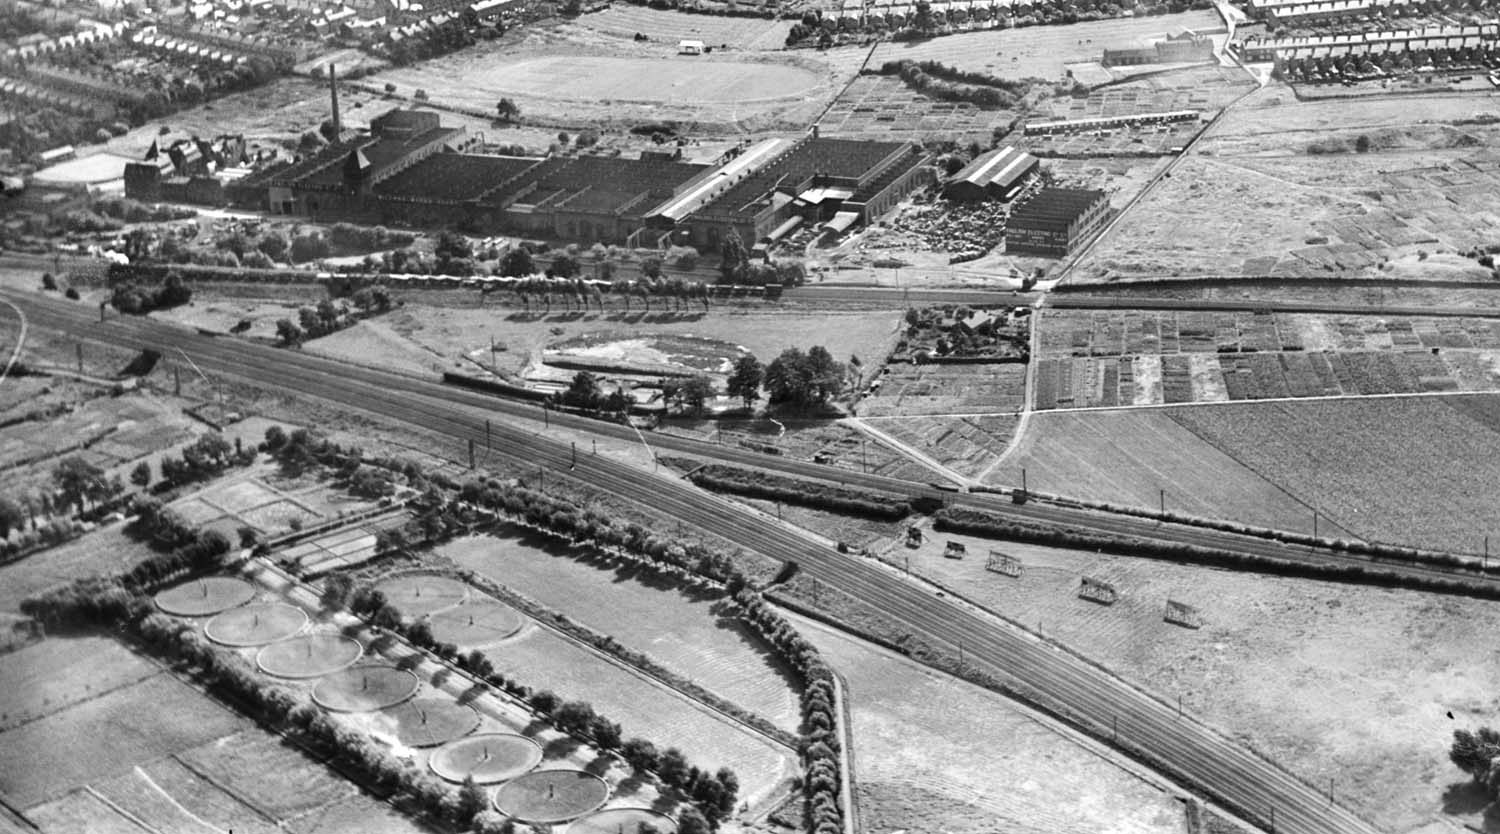 A 1930 panoramic aerial view of the divergence of the Trent Valley Railway, the line to Coventry and the Leamington branch